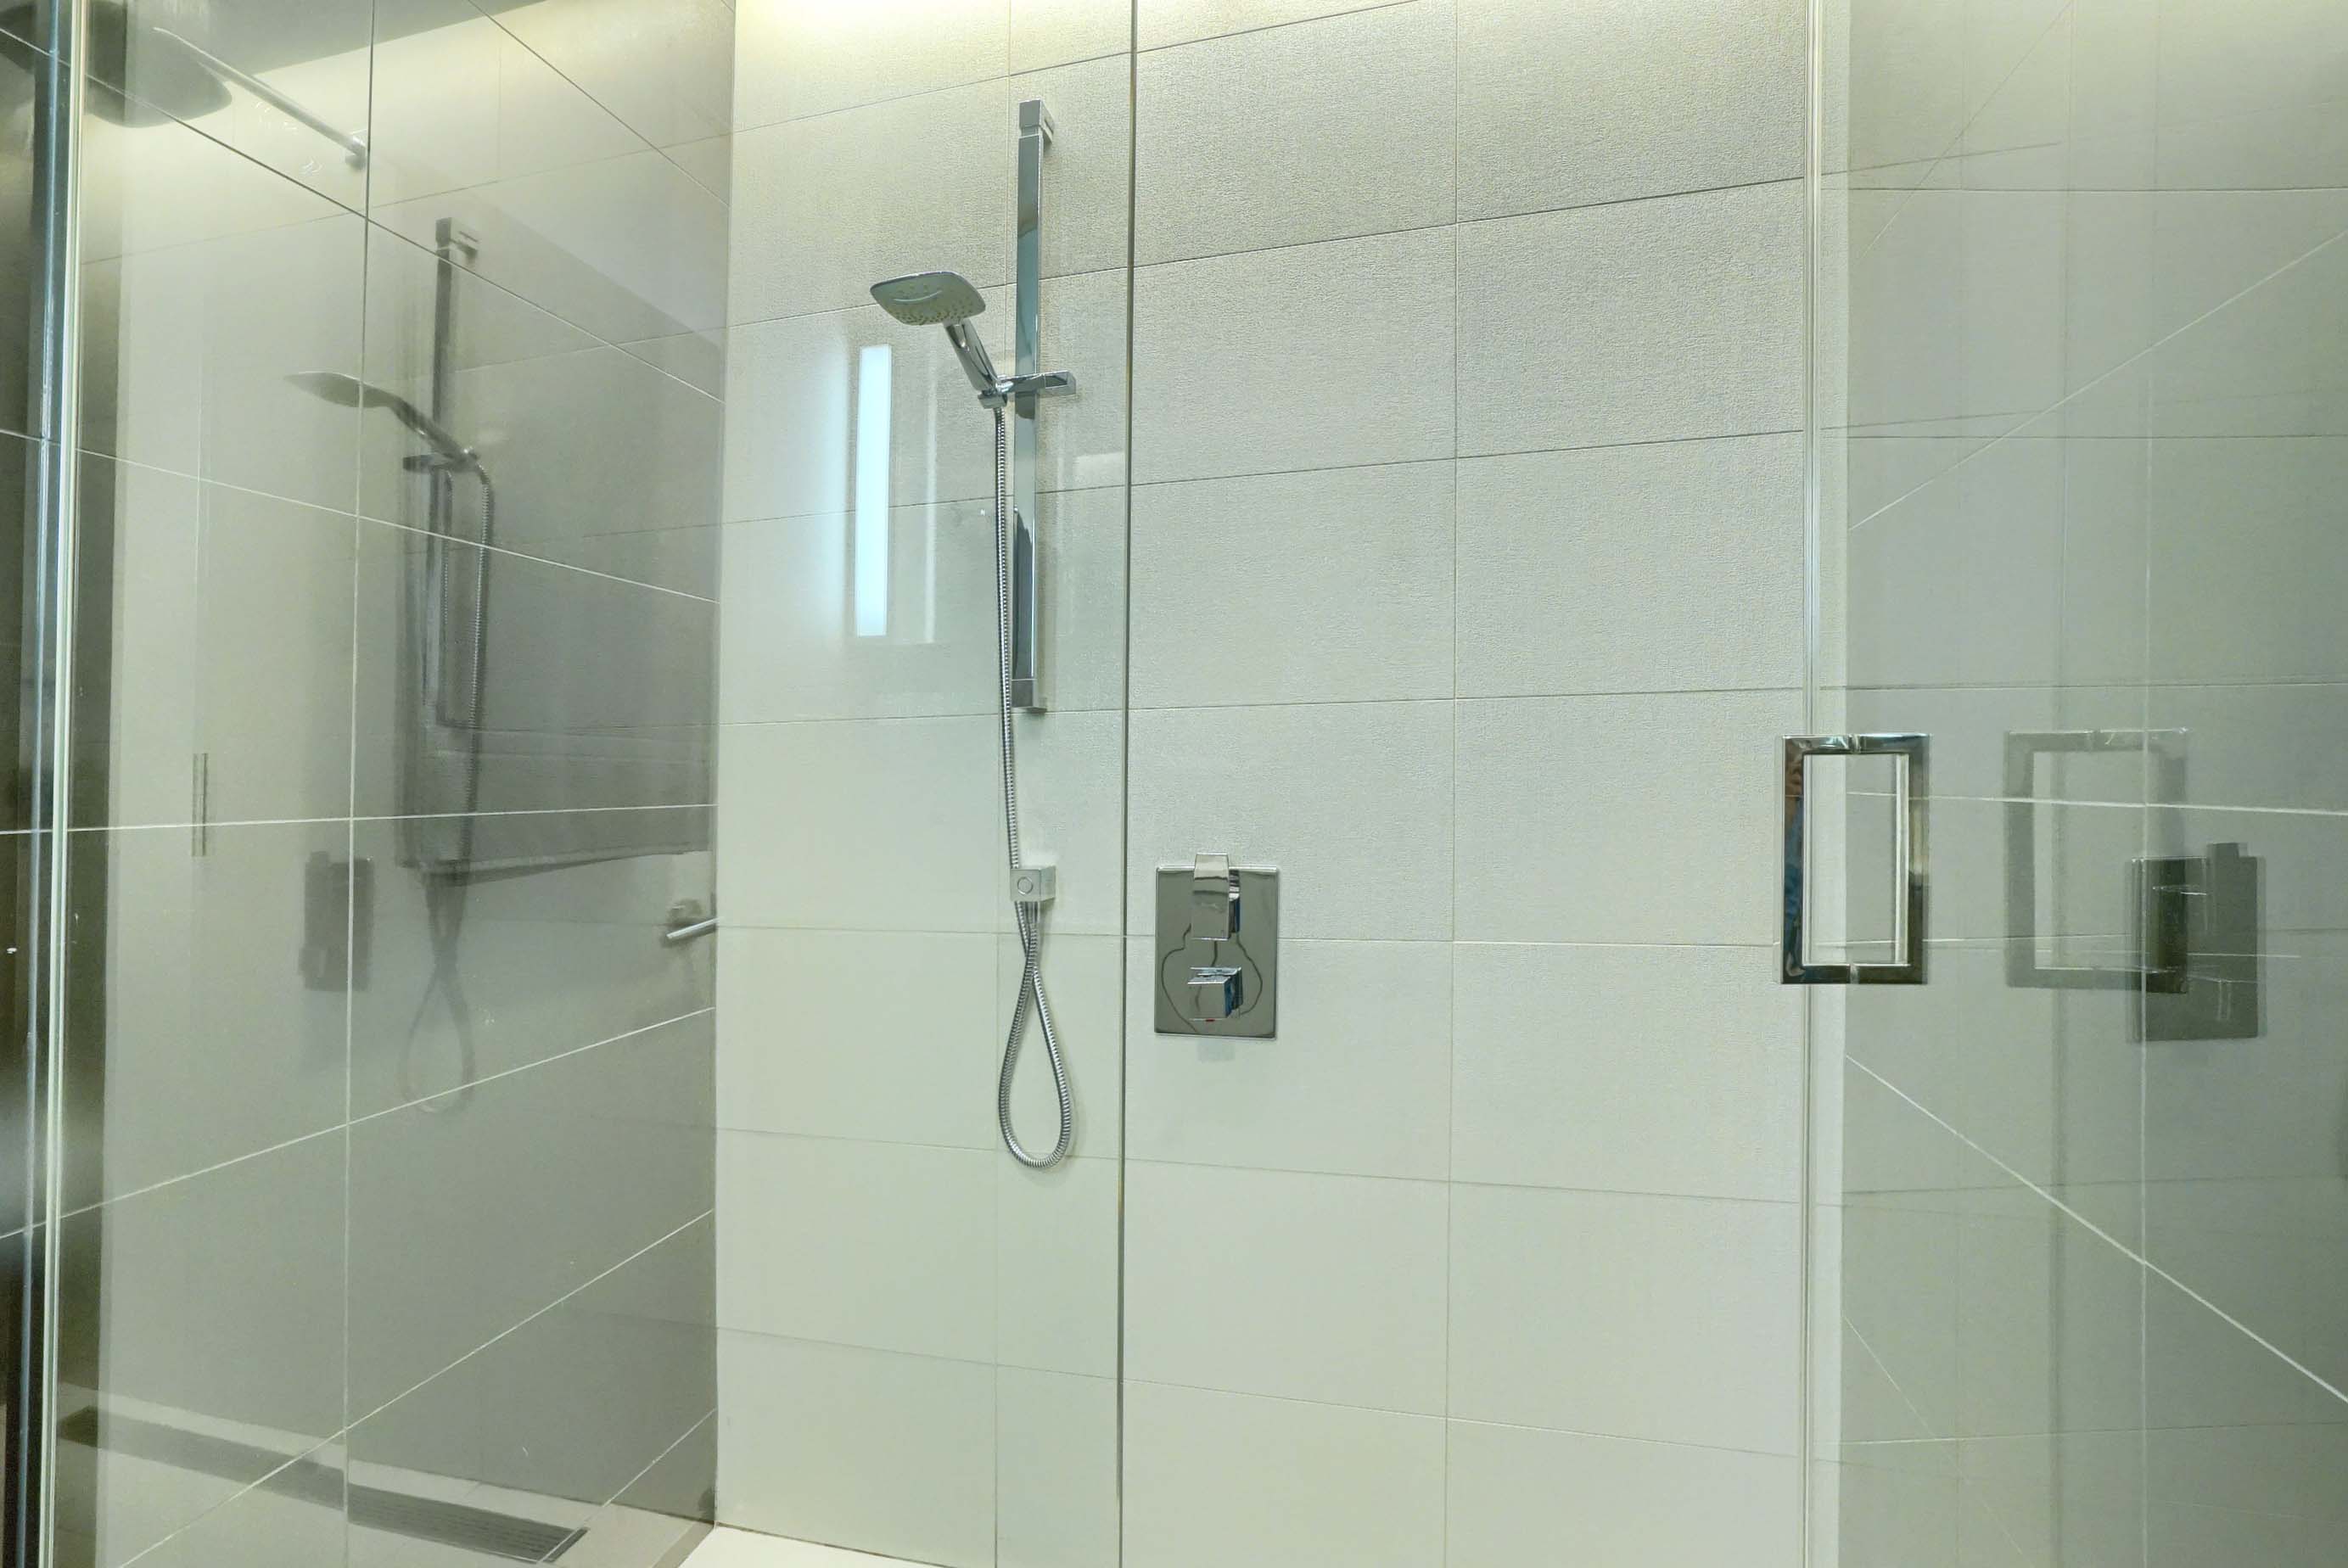 Expanded view of floor-to-ceiling glass shower with stainless modern faucets, handles and adjustable shower head. A perfect bathroom for this luxury furnished executive housing apartment in montreal